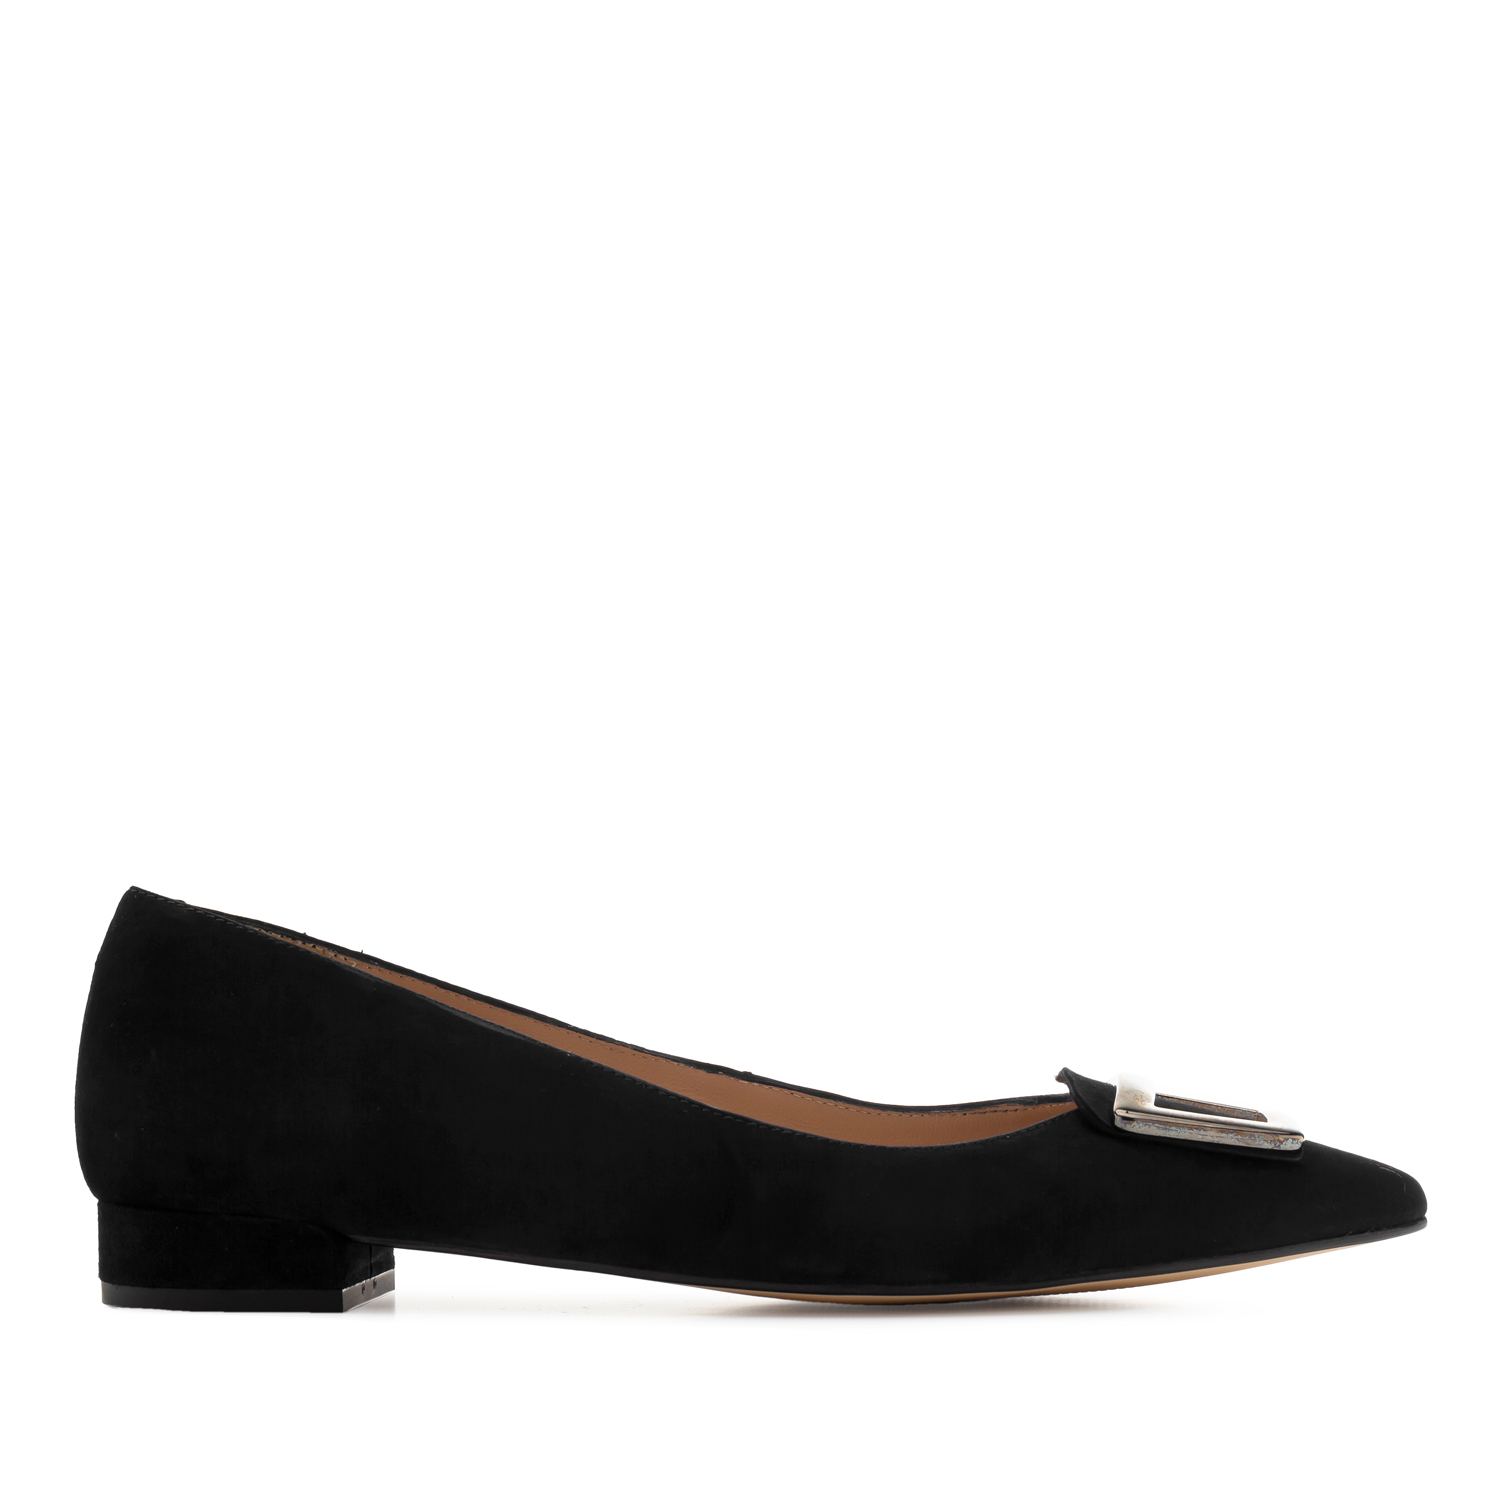 Trim Loafers in Black Suede Leather 